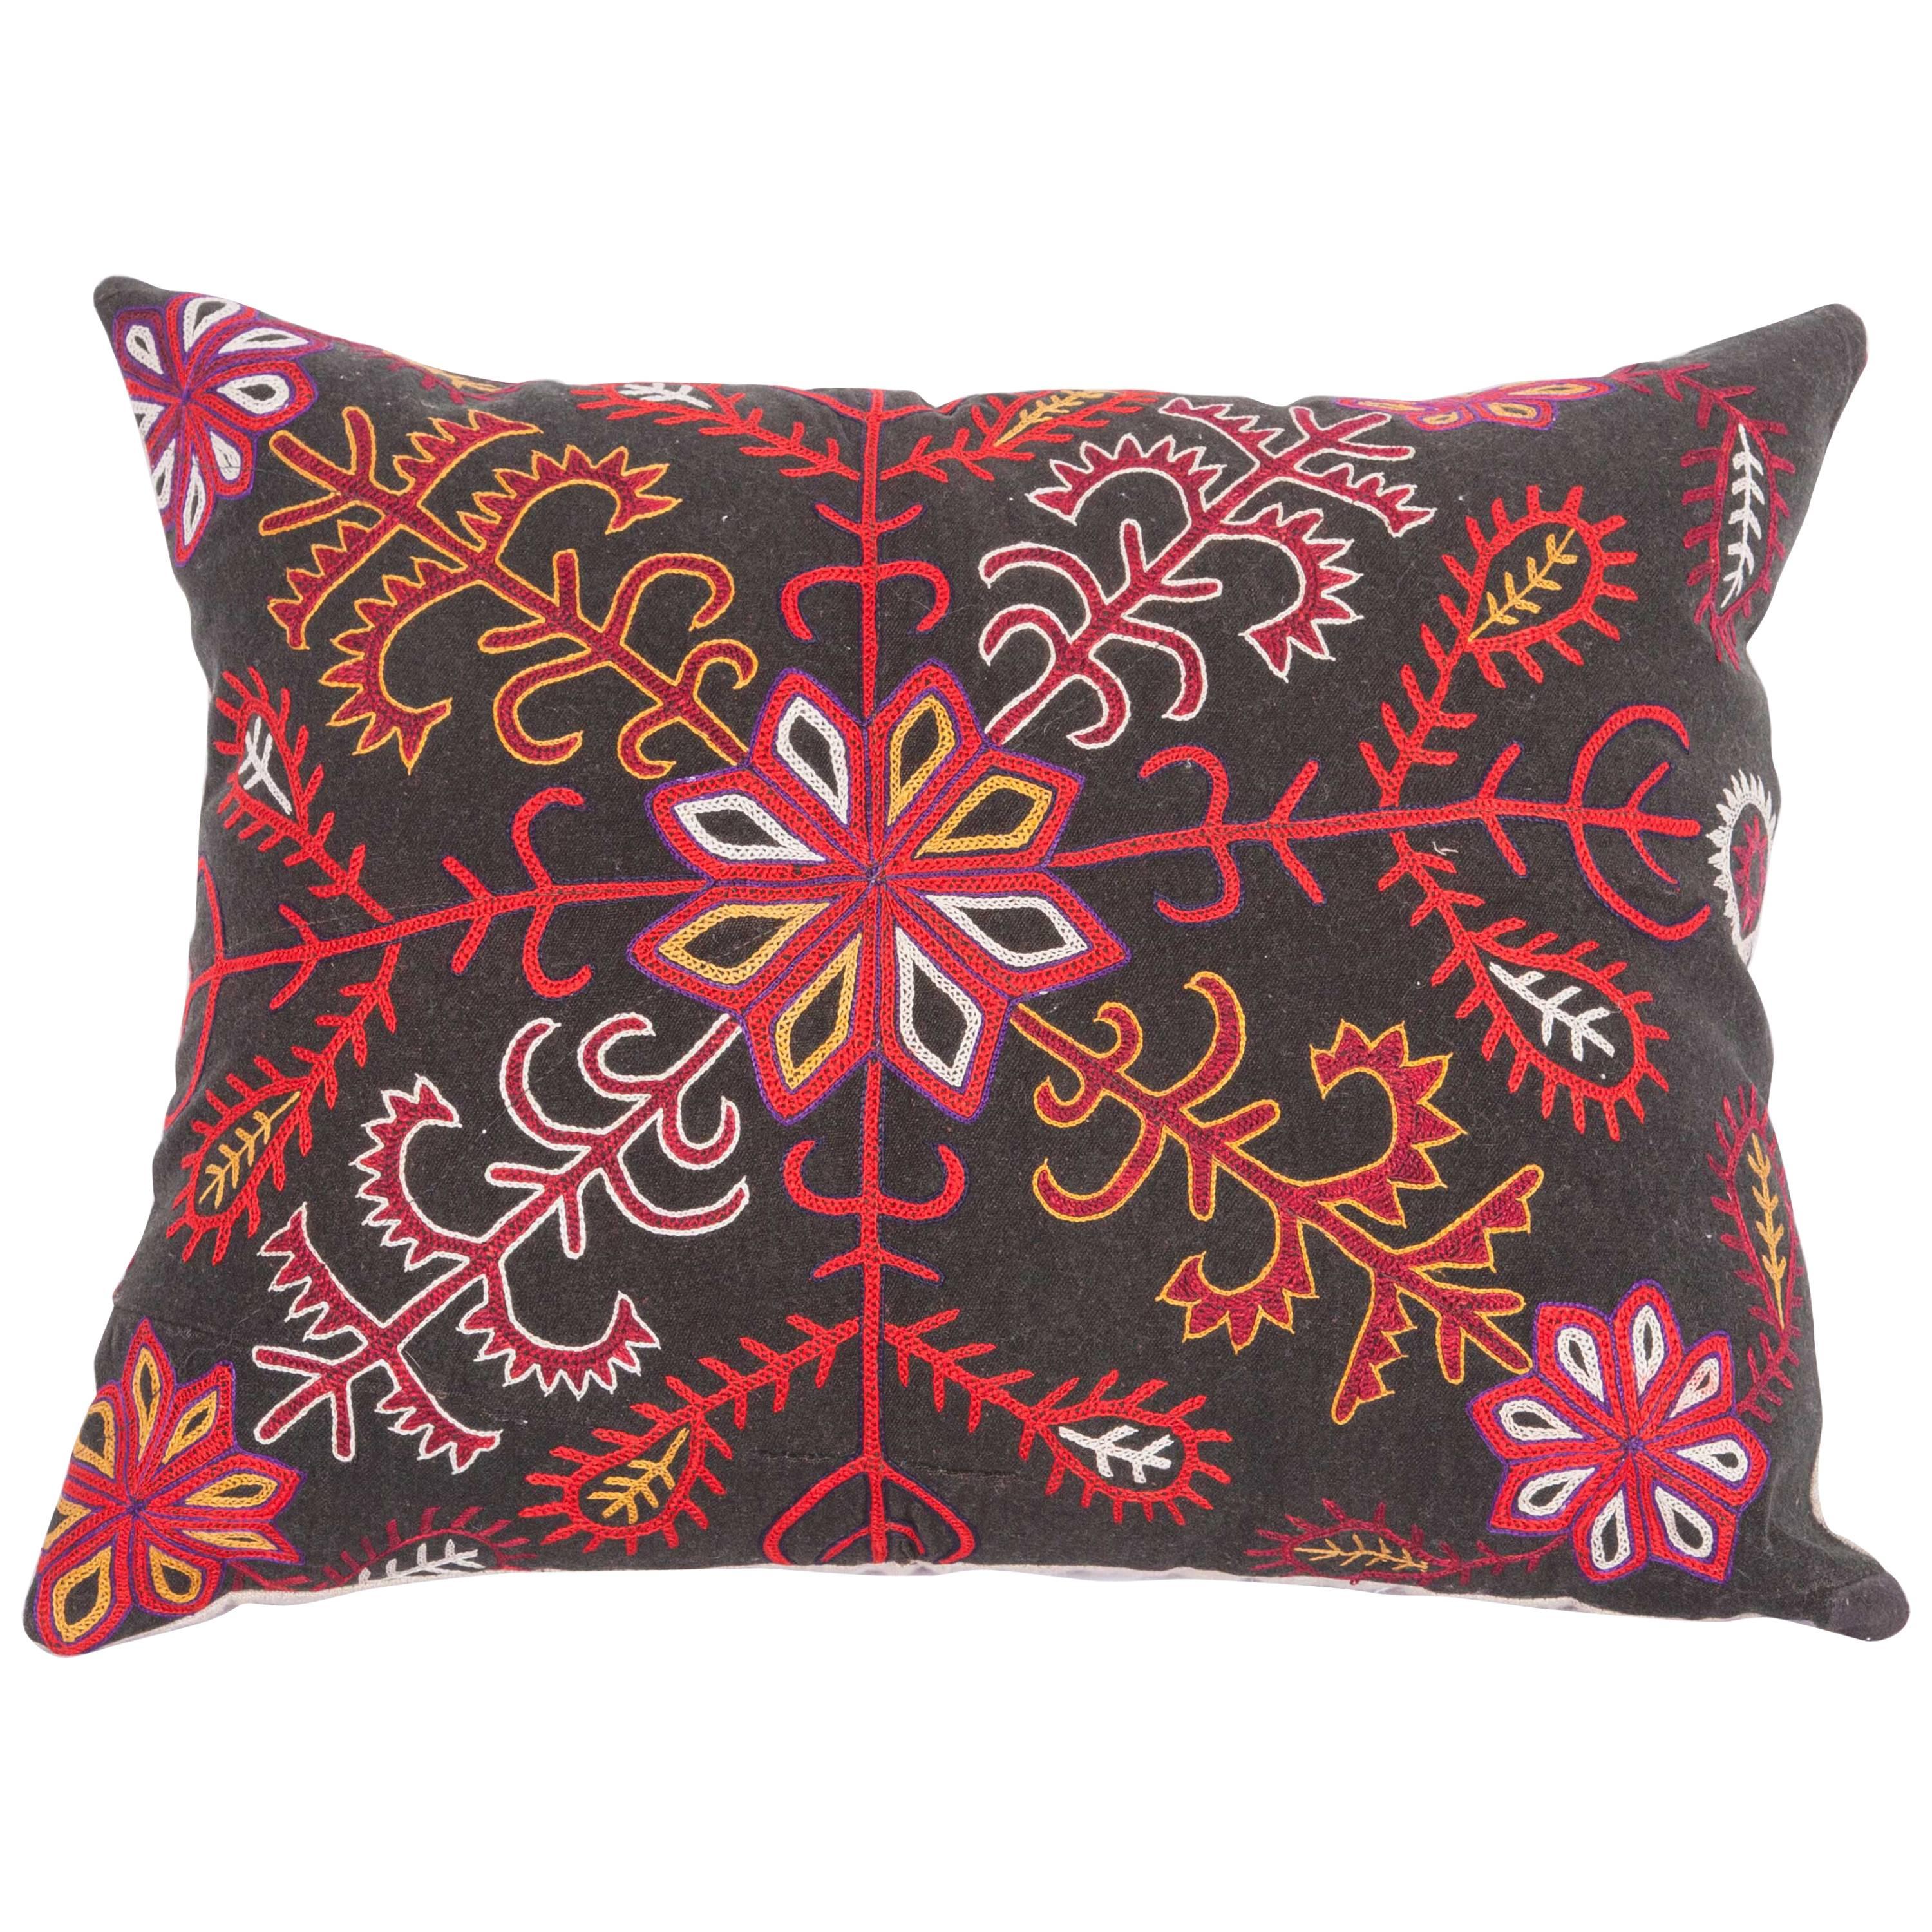 Antique Pillow Made Out of a Kyrgyz Embroidery